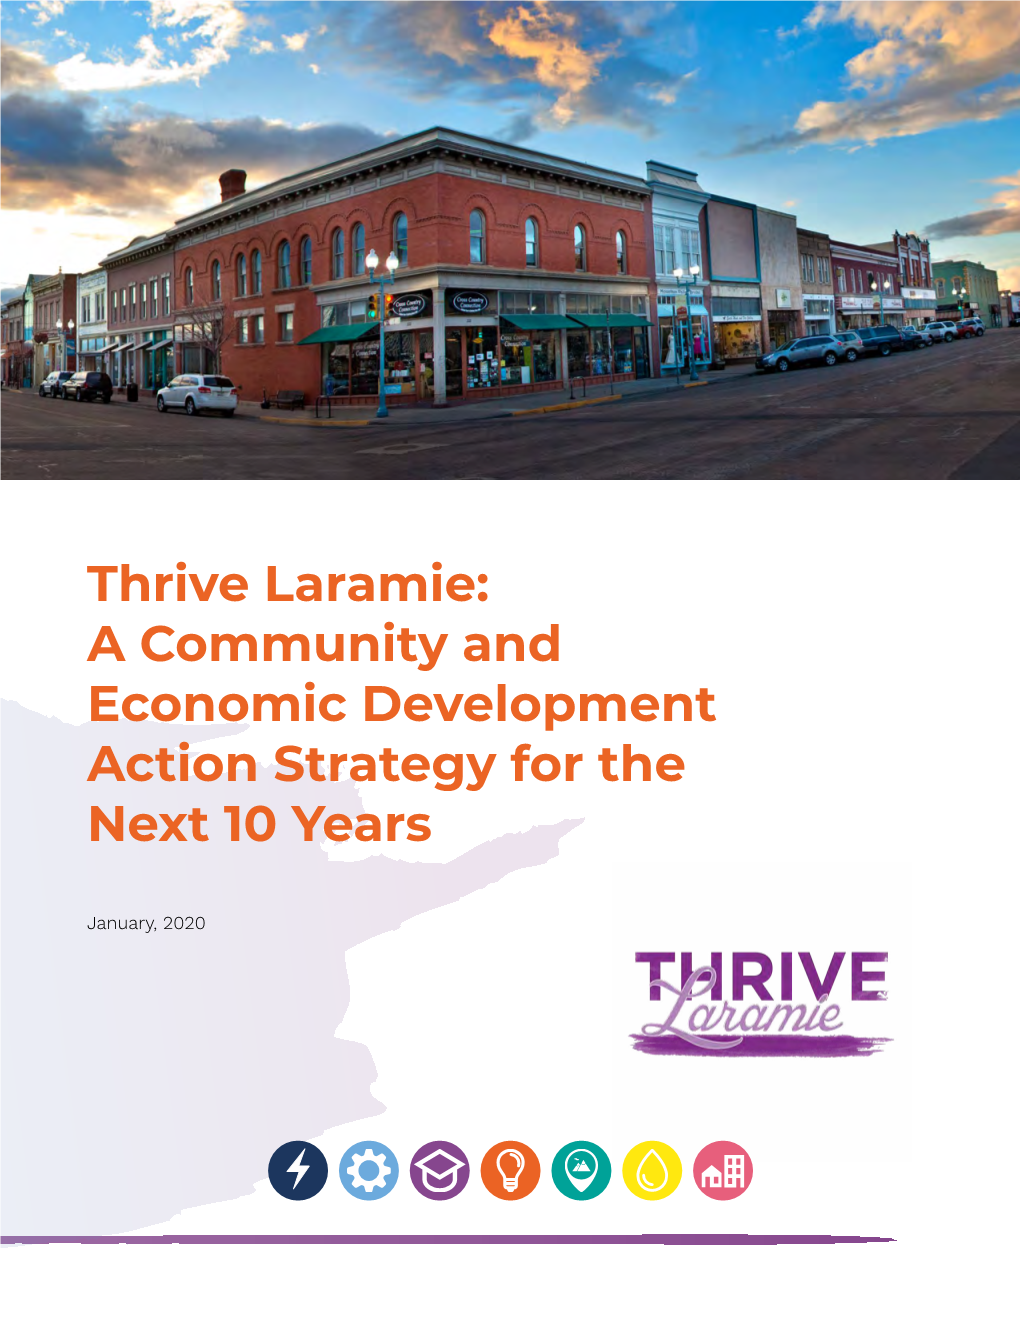 Thrive Laramie: a Community and Economic Development Action Strategy for the Next 10 Years